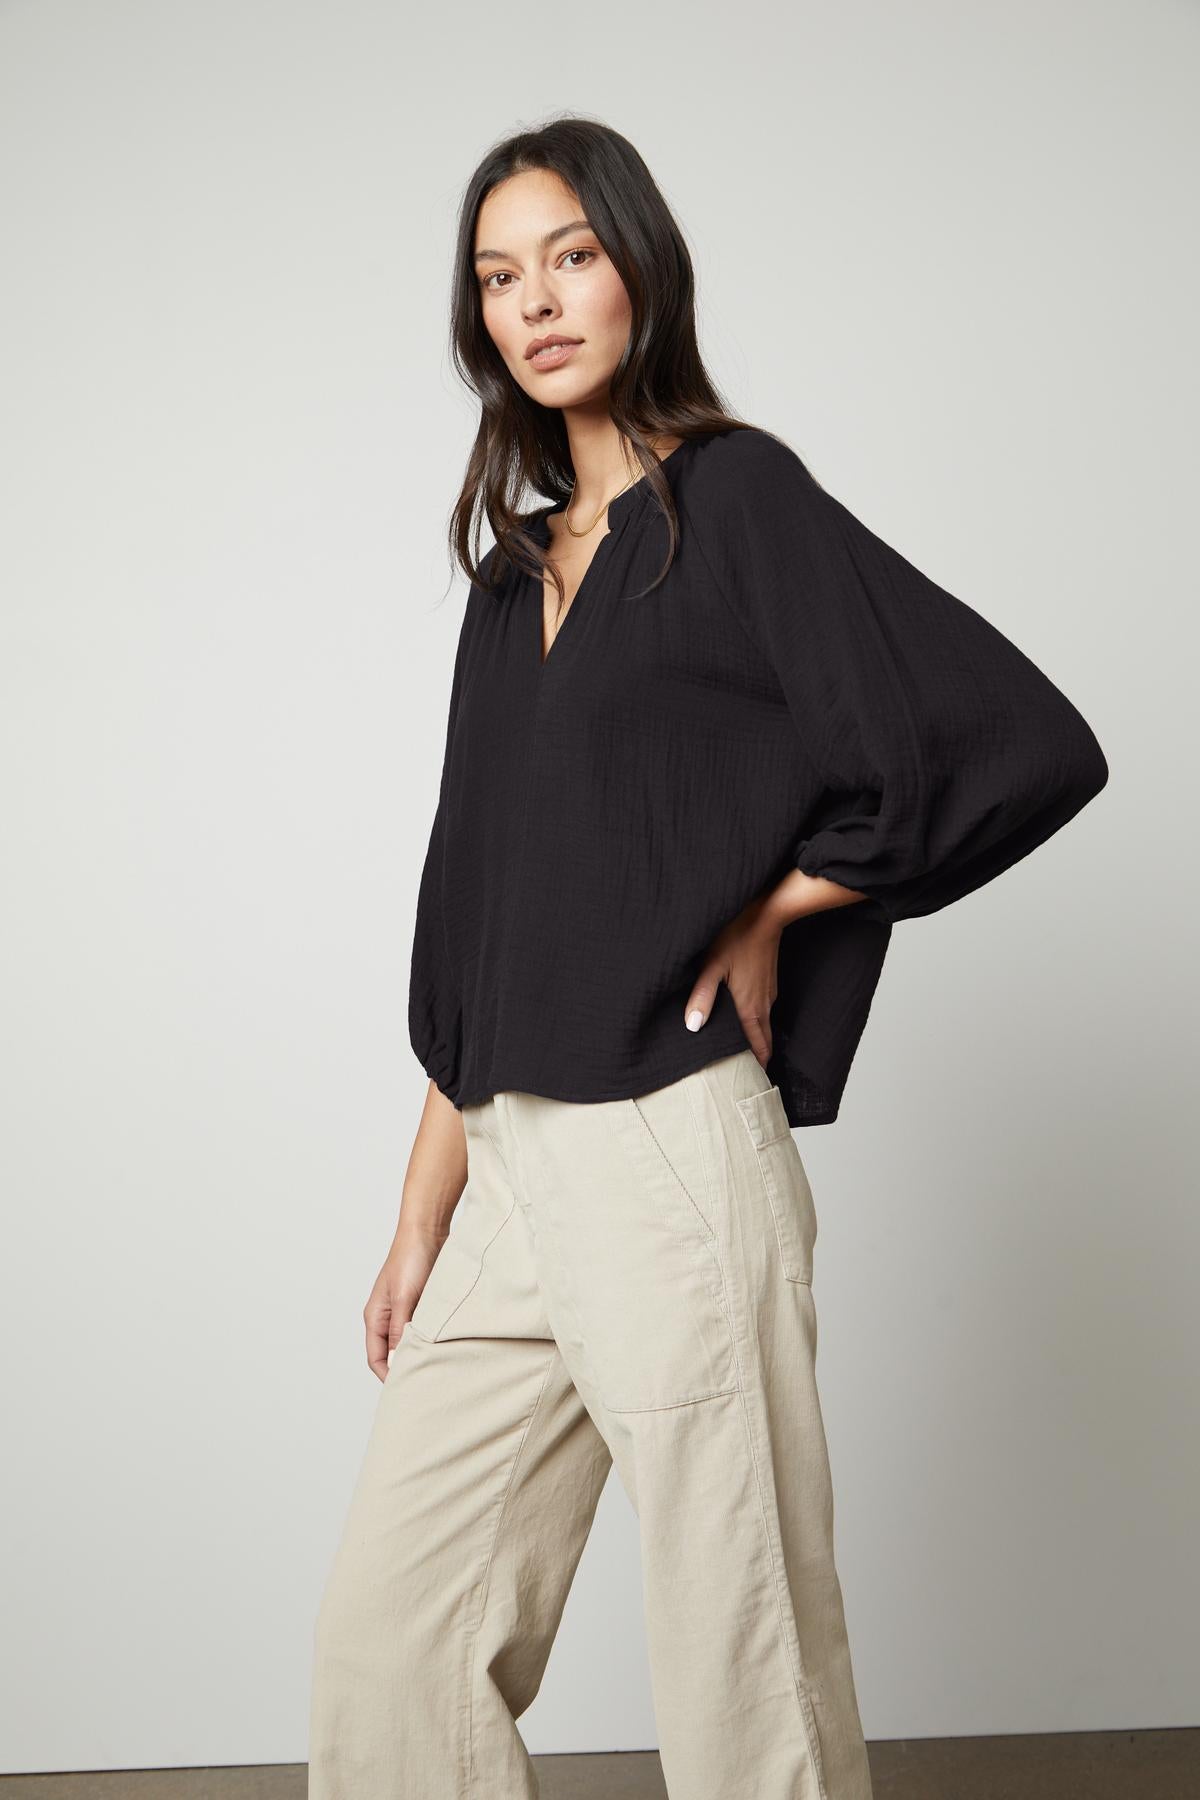 The model is wearing a relaxed-fit, black Velvet by Graham & Spencer top with a v-neckline and beige wide leg pants.-35678659018945